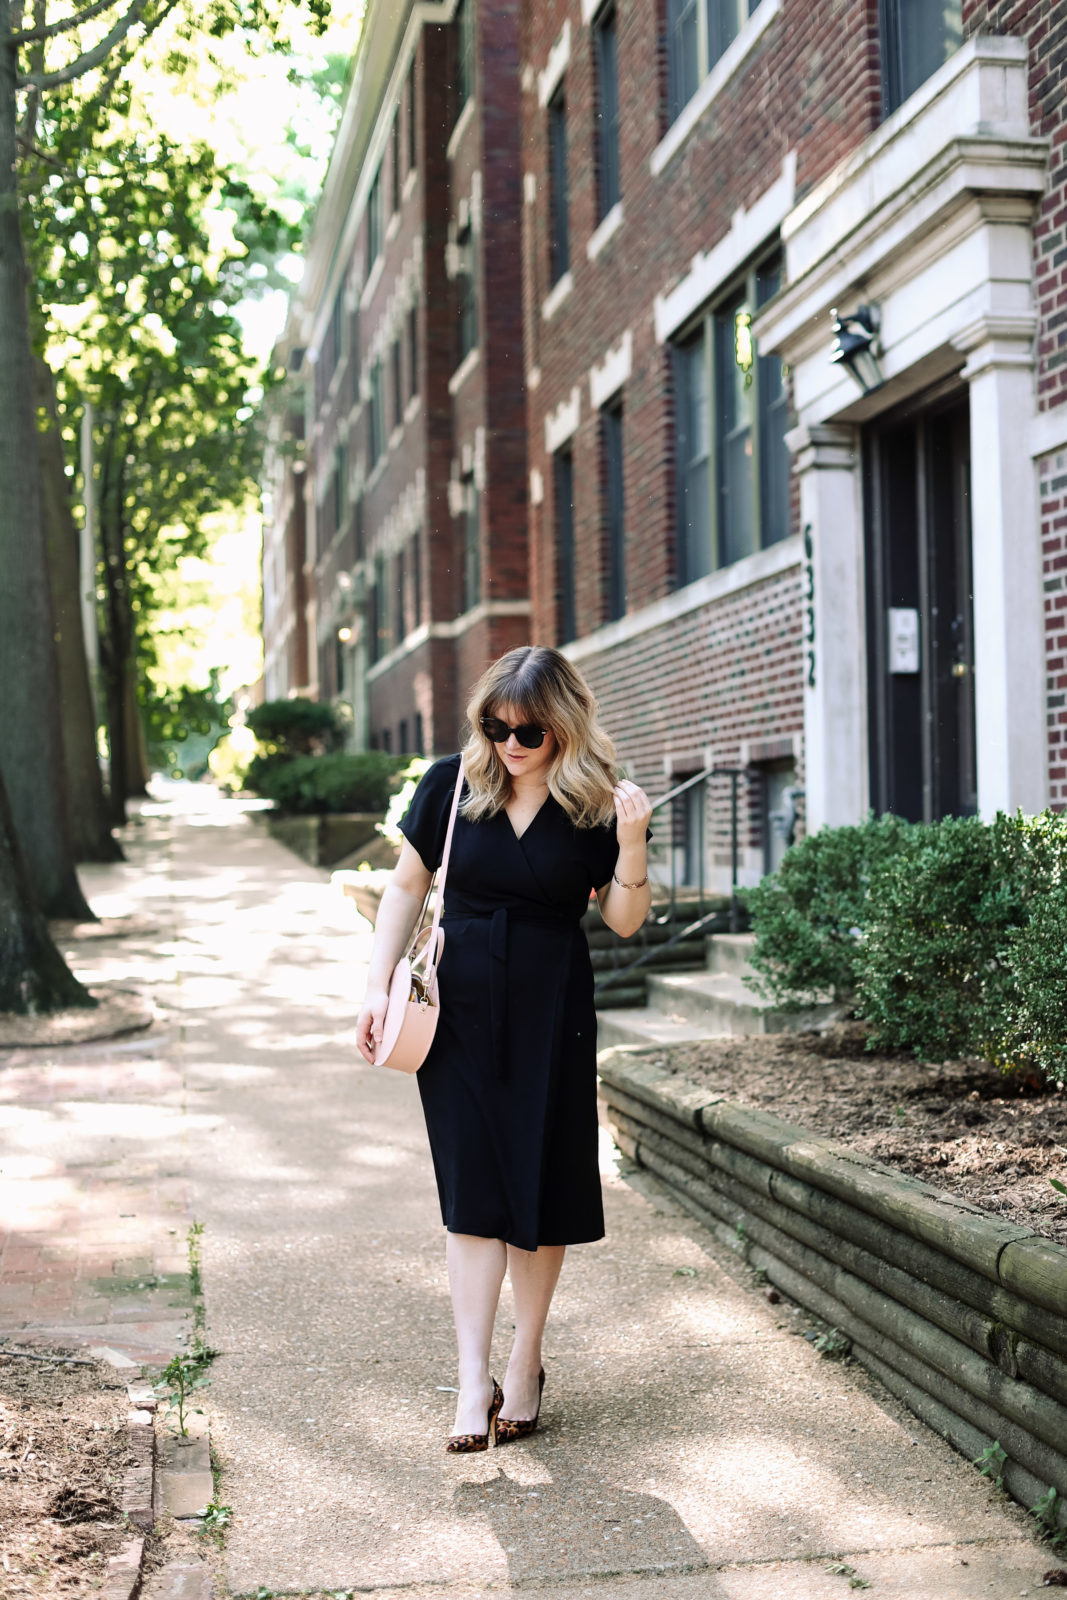 Summer Work Style: The Wrap Dress – Tracy Coble